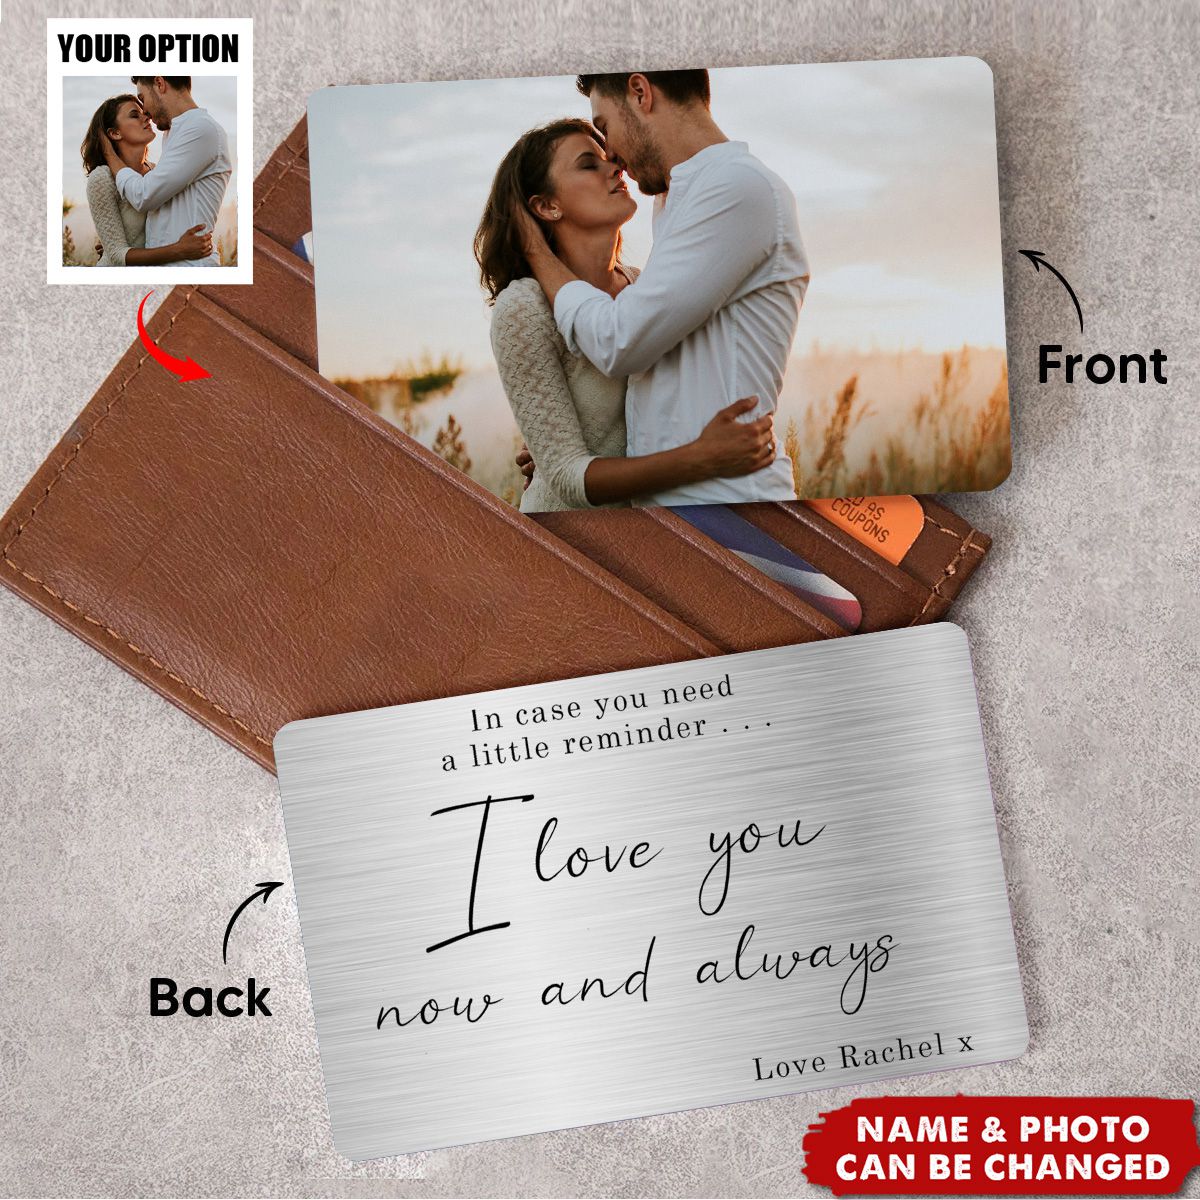 Personalized I Love You Now And Always Wallet Card